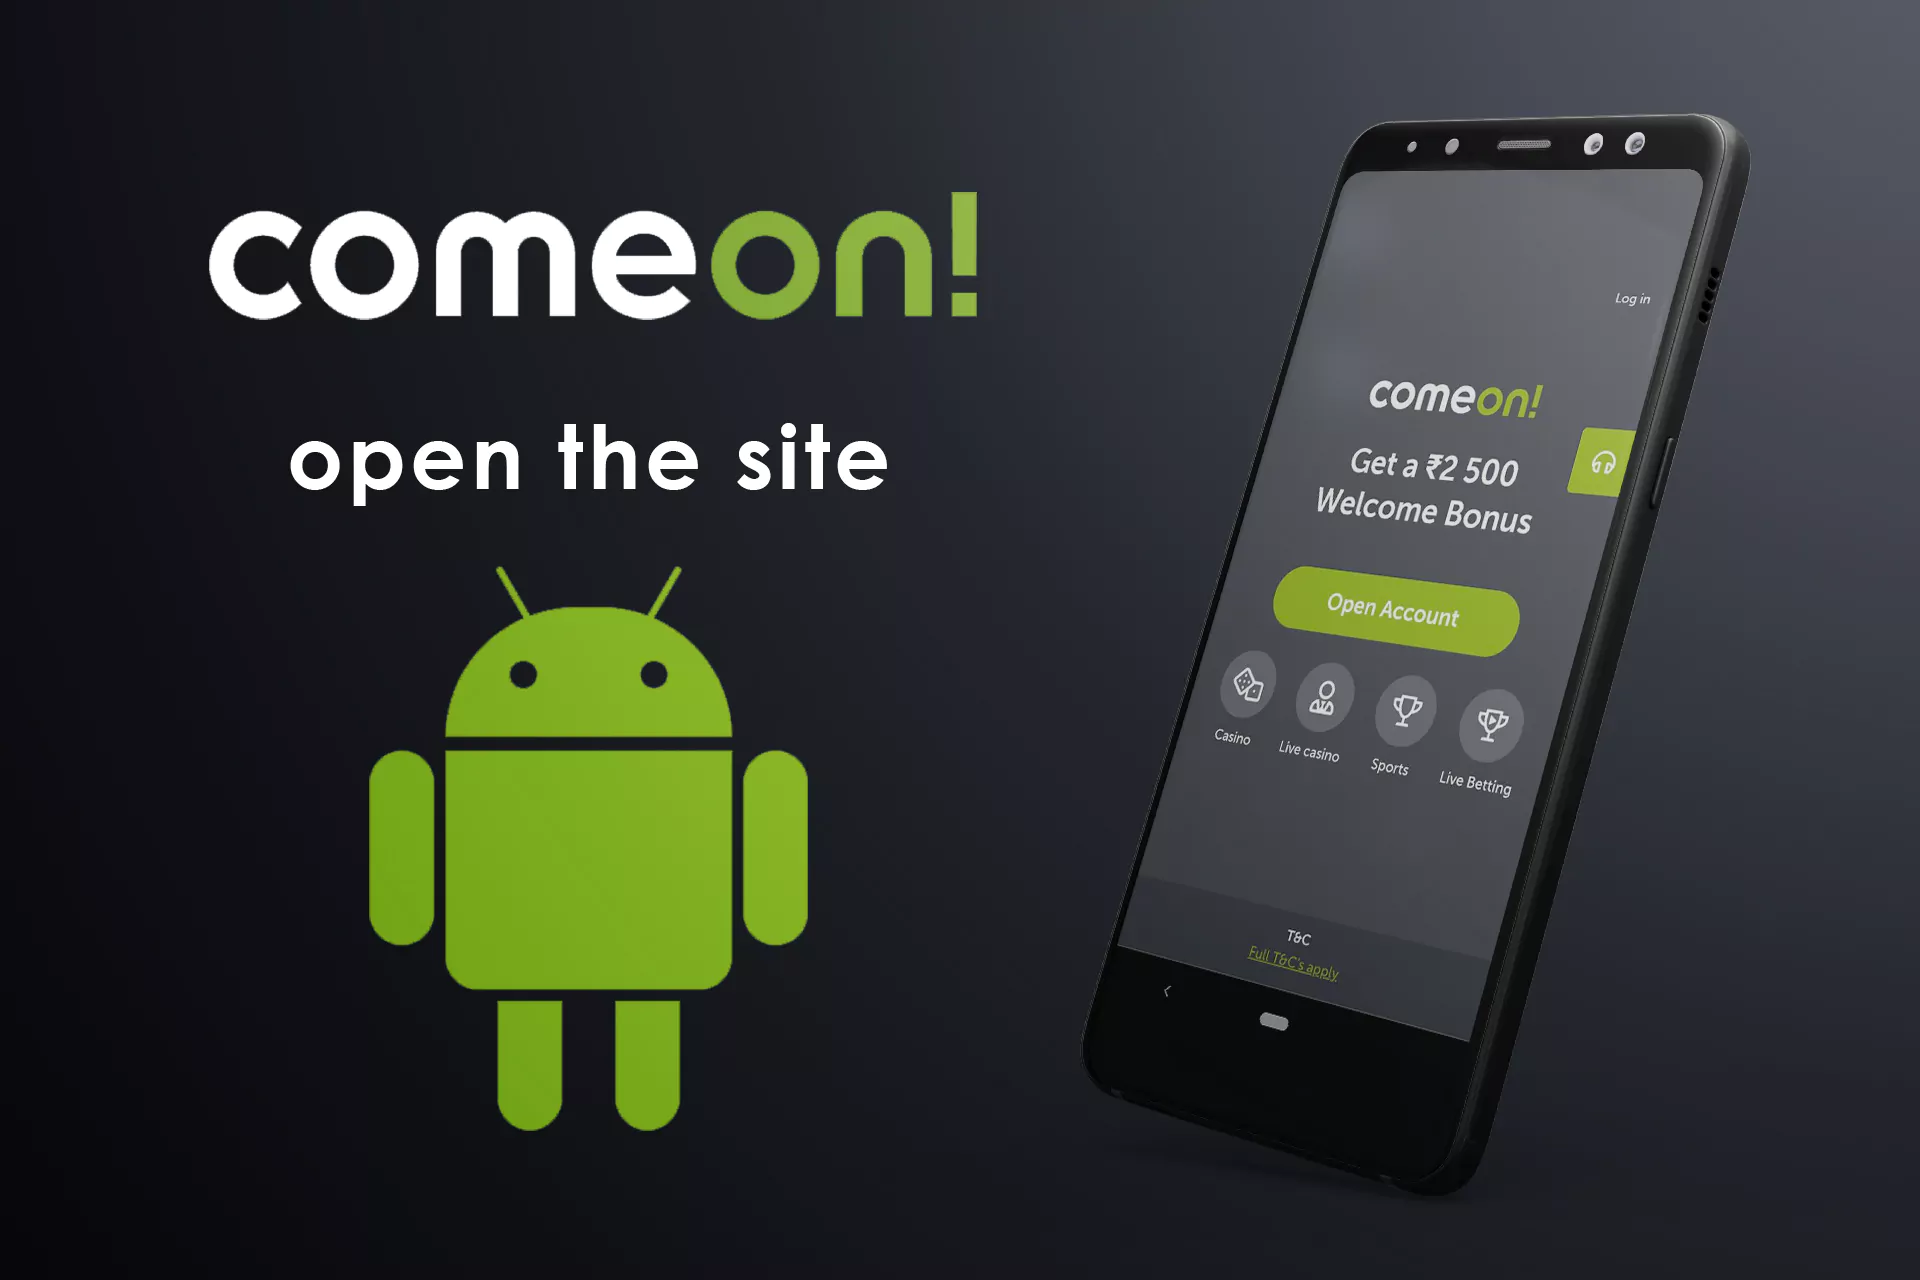 Go to the site of Comeon in a mobile browser.